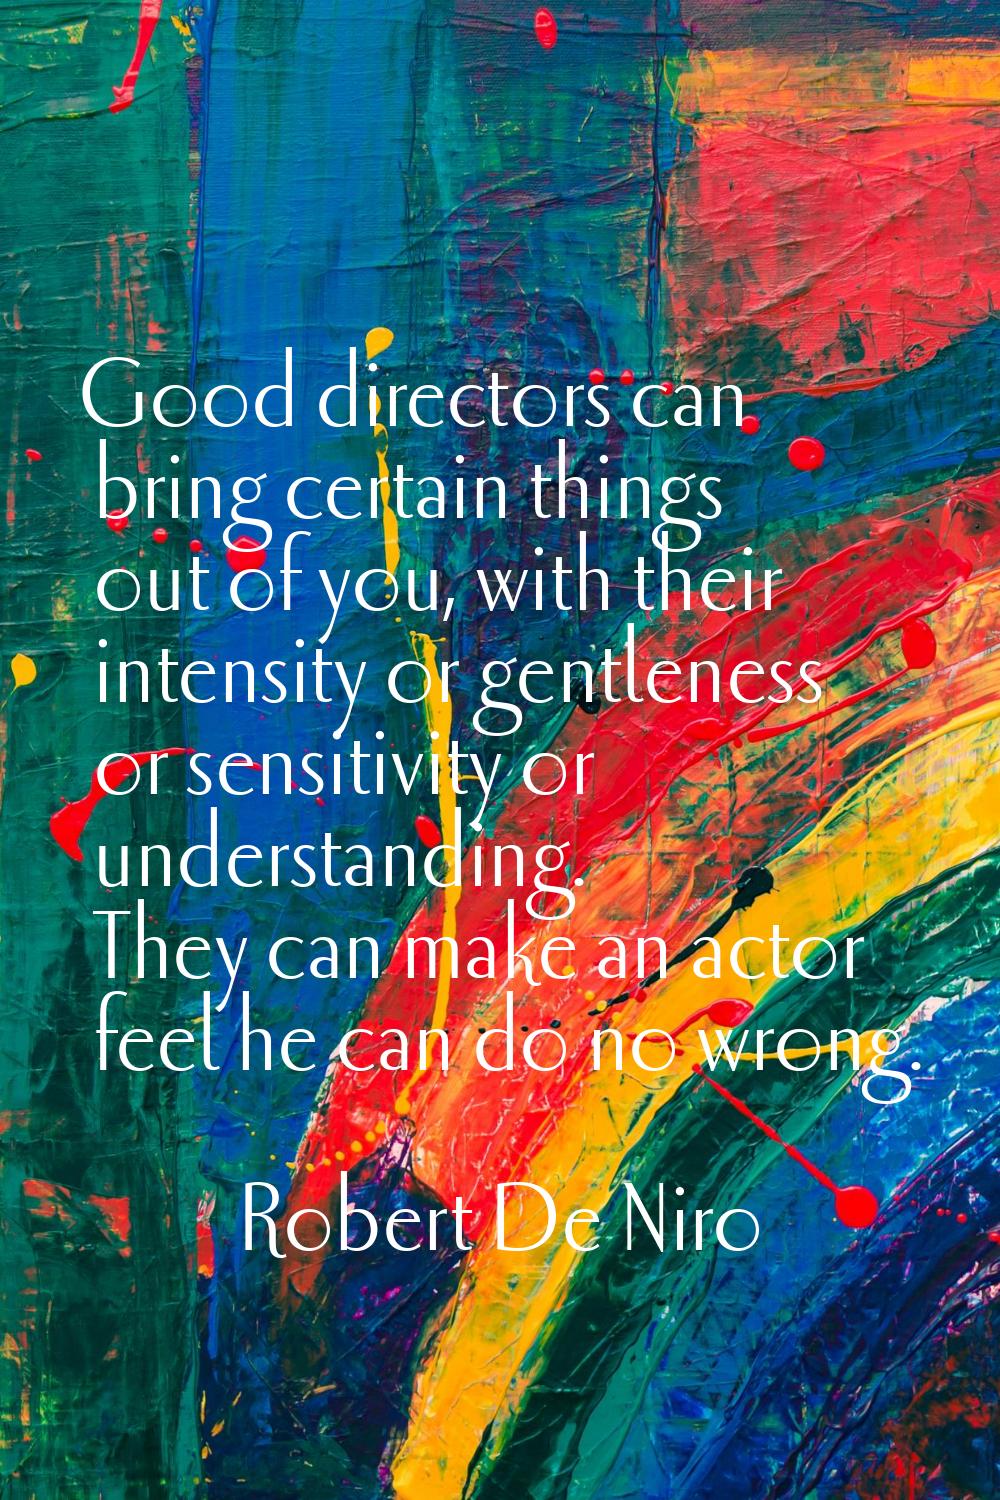 Good directors can bring certain things out of you, with their intensity or gentleness or sensitivi